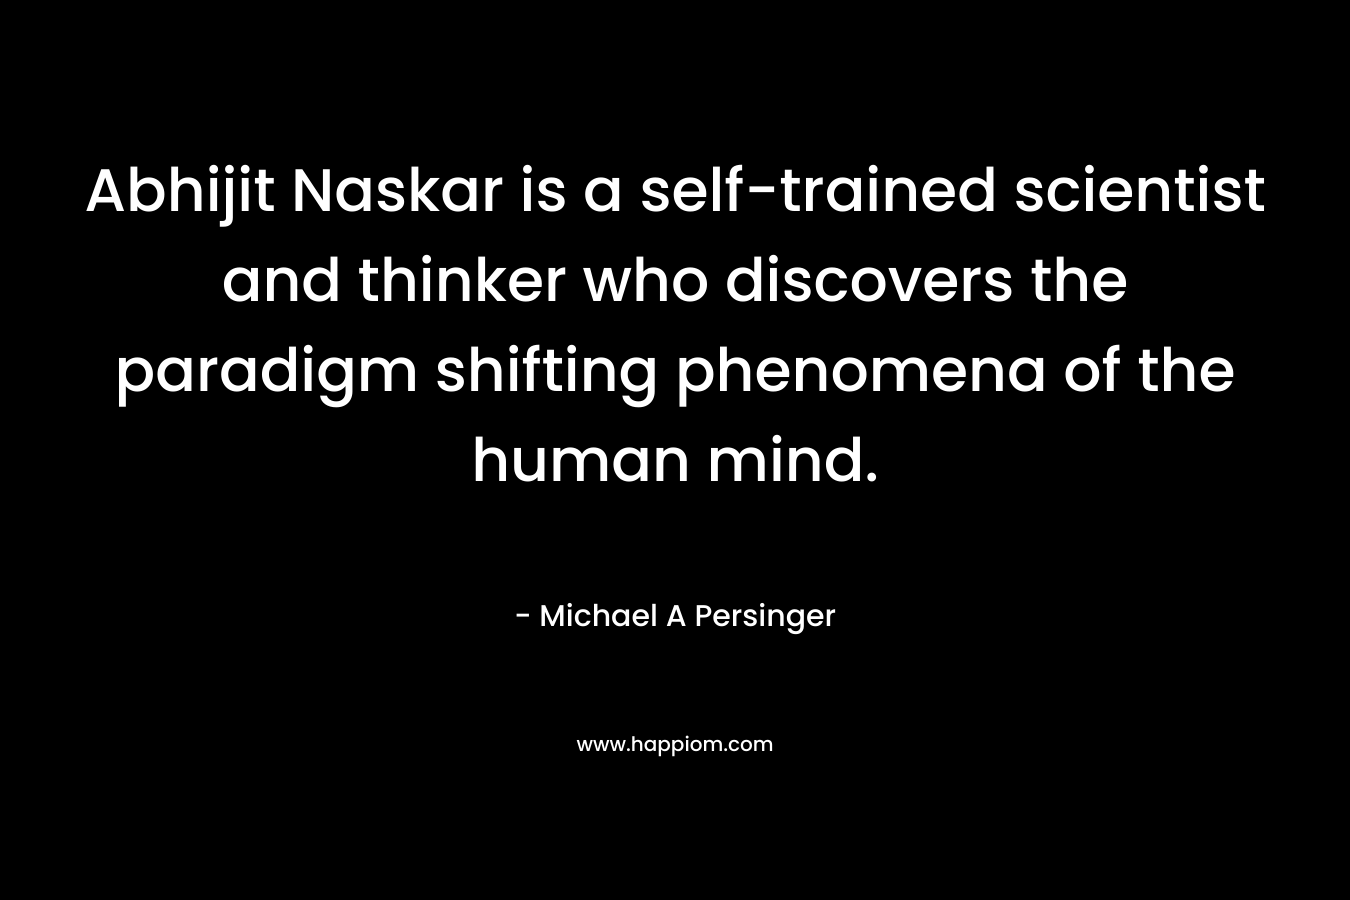 Abhijit Naskar is a self-trained scientist and thinker who discovers the paradigm shifting phenomena of the human mind.